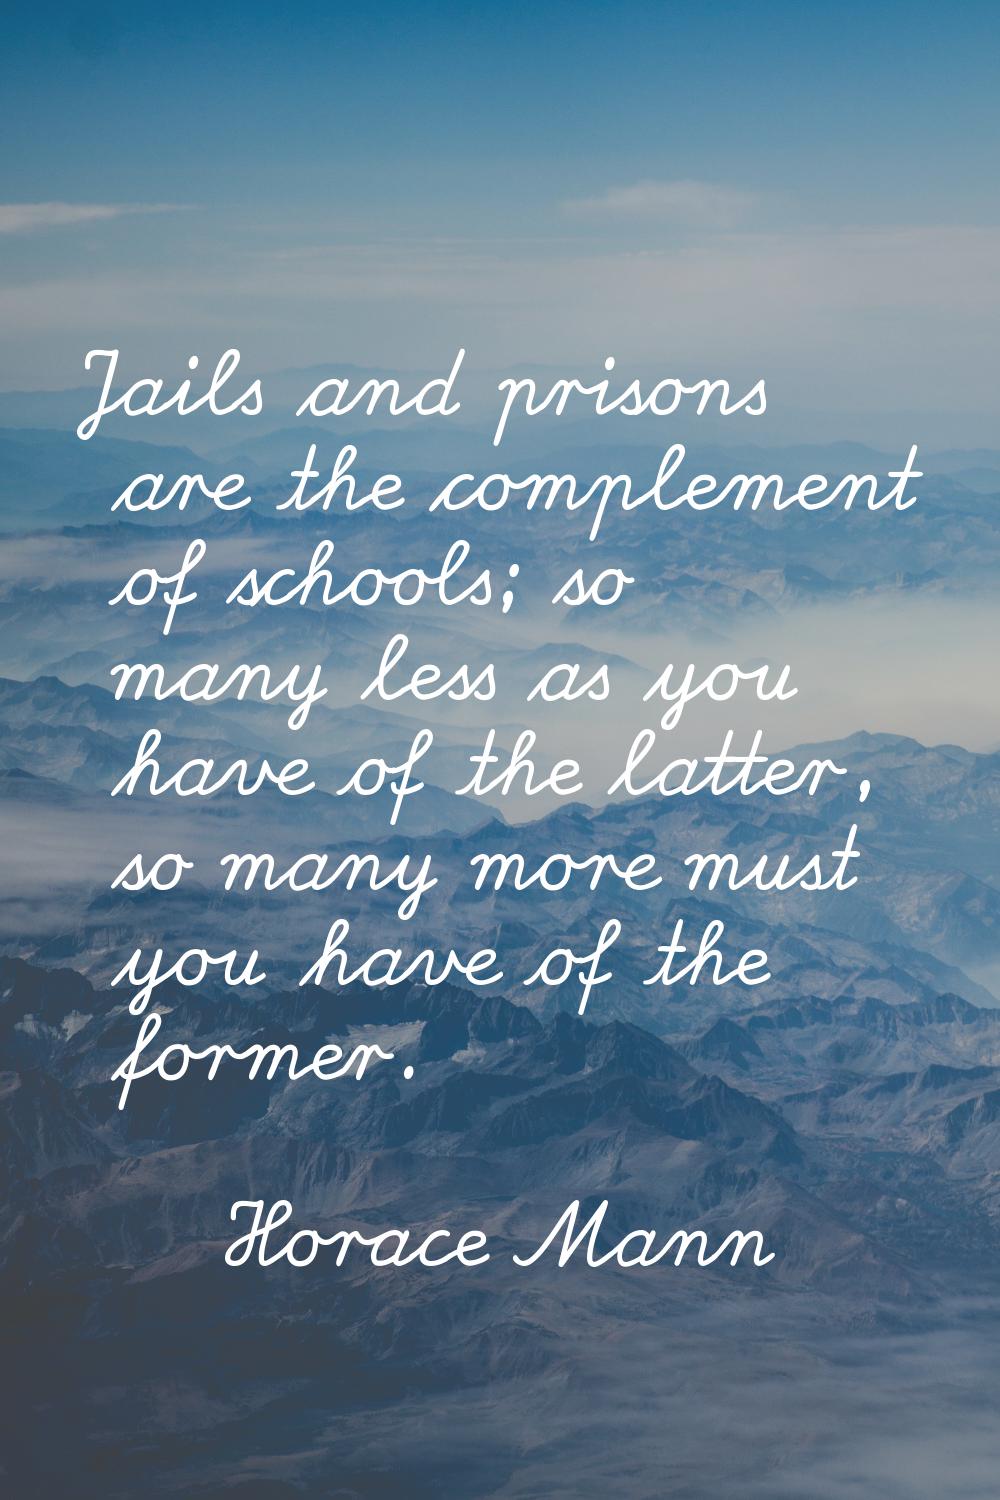 Jails and prisons are the complement of schools; so many less as you have of the latter, so many mo